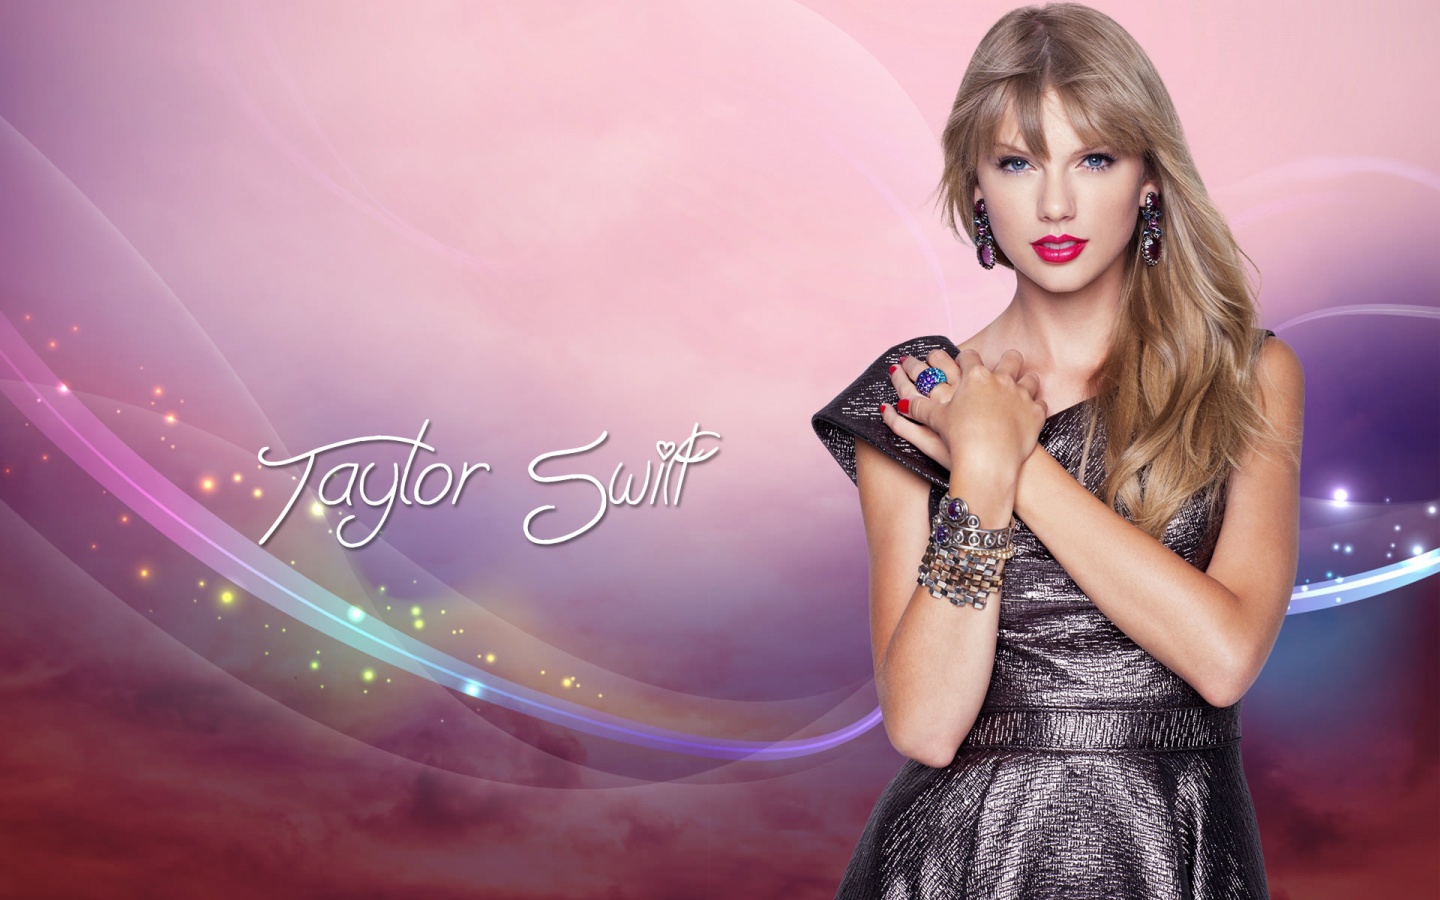 Free Download Taylor Swift Computer Wallpapers Desktop Backgrounds 1440x900 Id 1440x900 For Your Desktop Mobile Tablet Explore 48 Taylor Swift Wallpaper Downloads Taylor Swift Wallpaper Downloads Taylor Swift Backgrounds